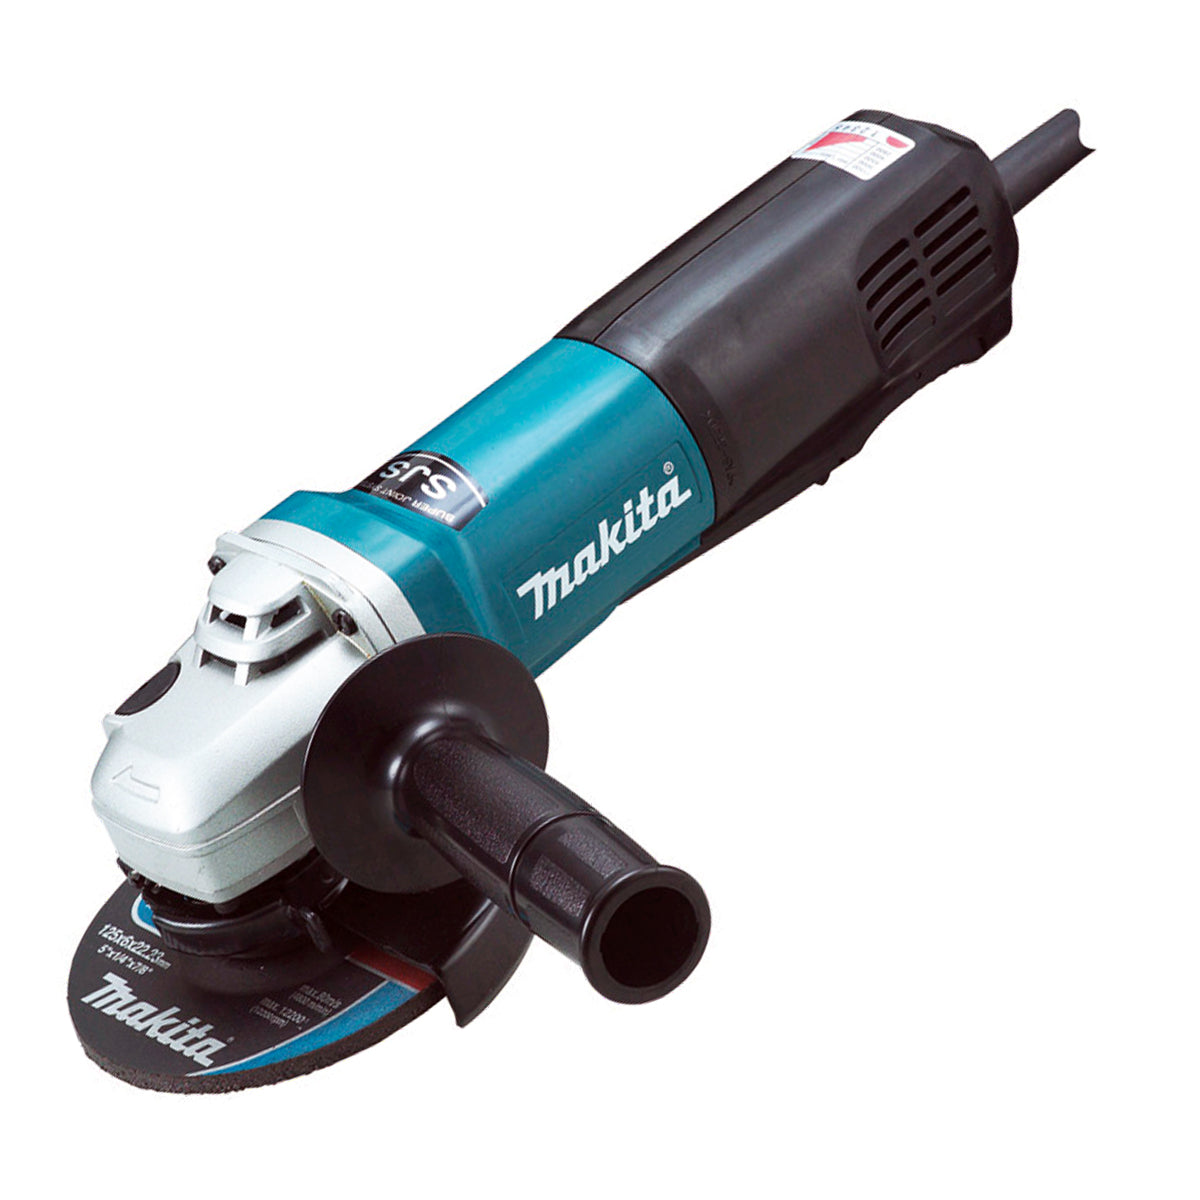 Makita 9565PCV SJS High Power Paddle Switch Angle Grinder, 5